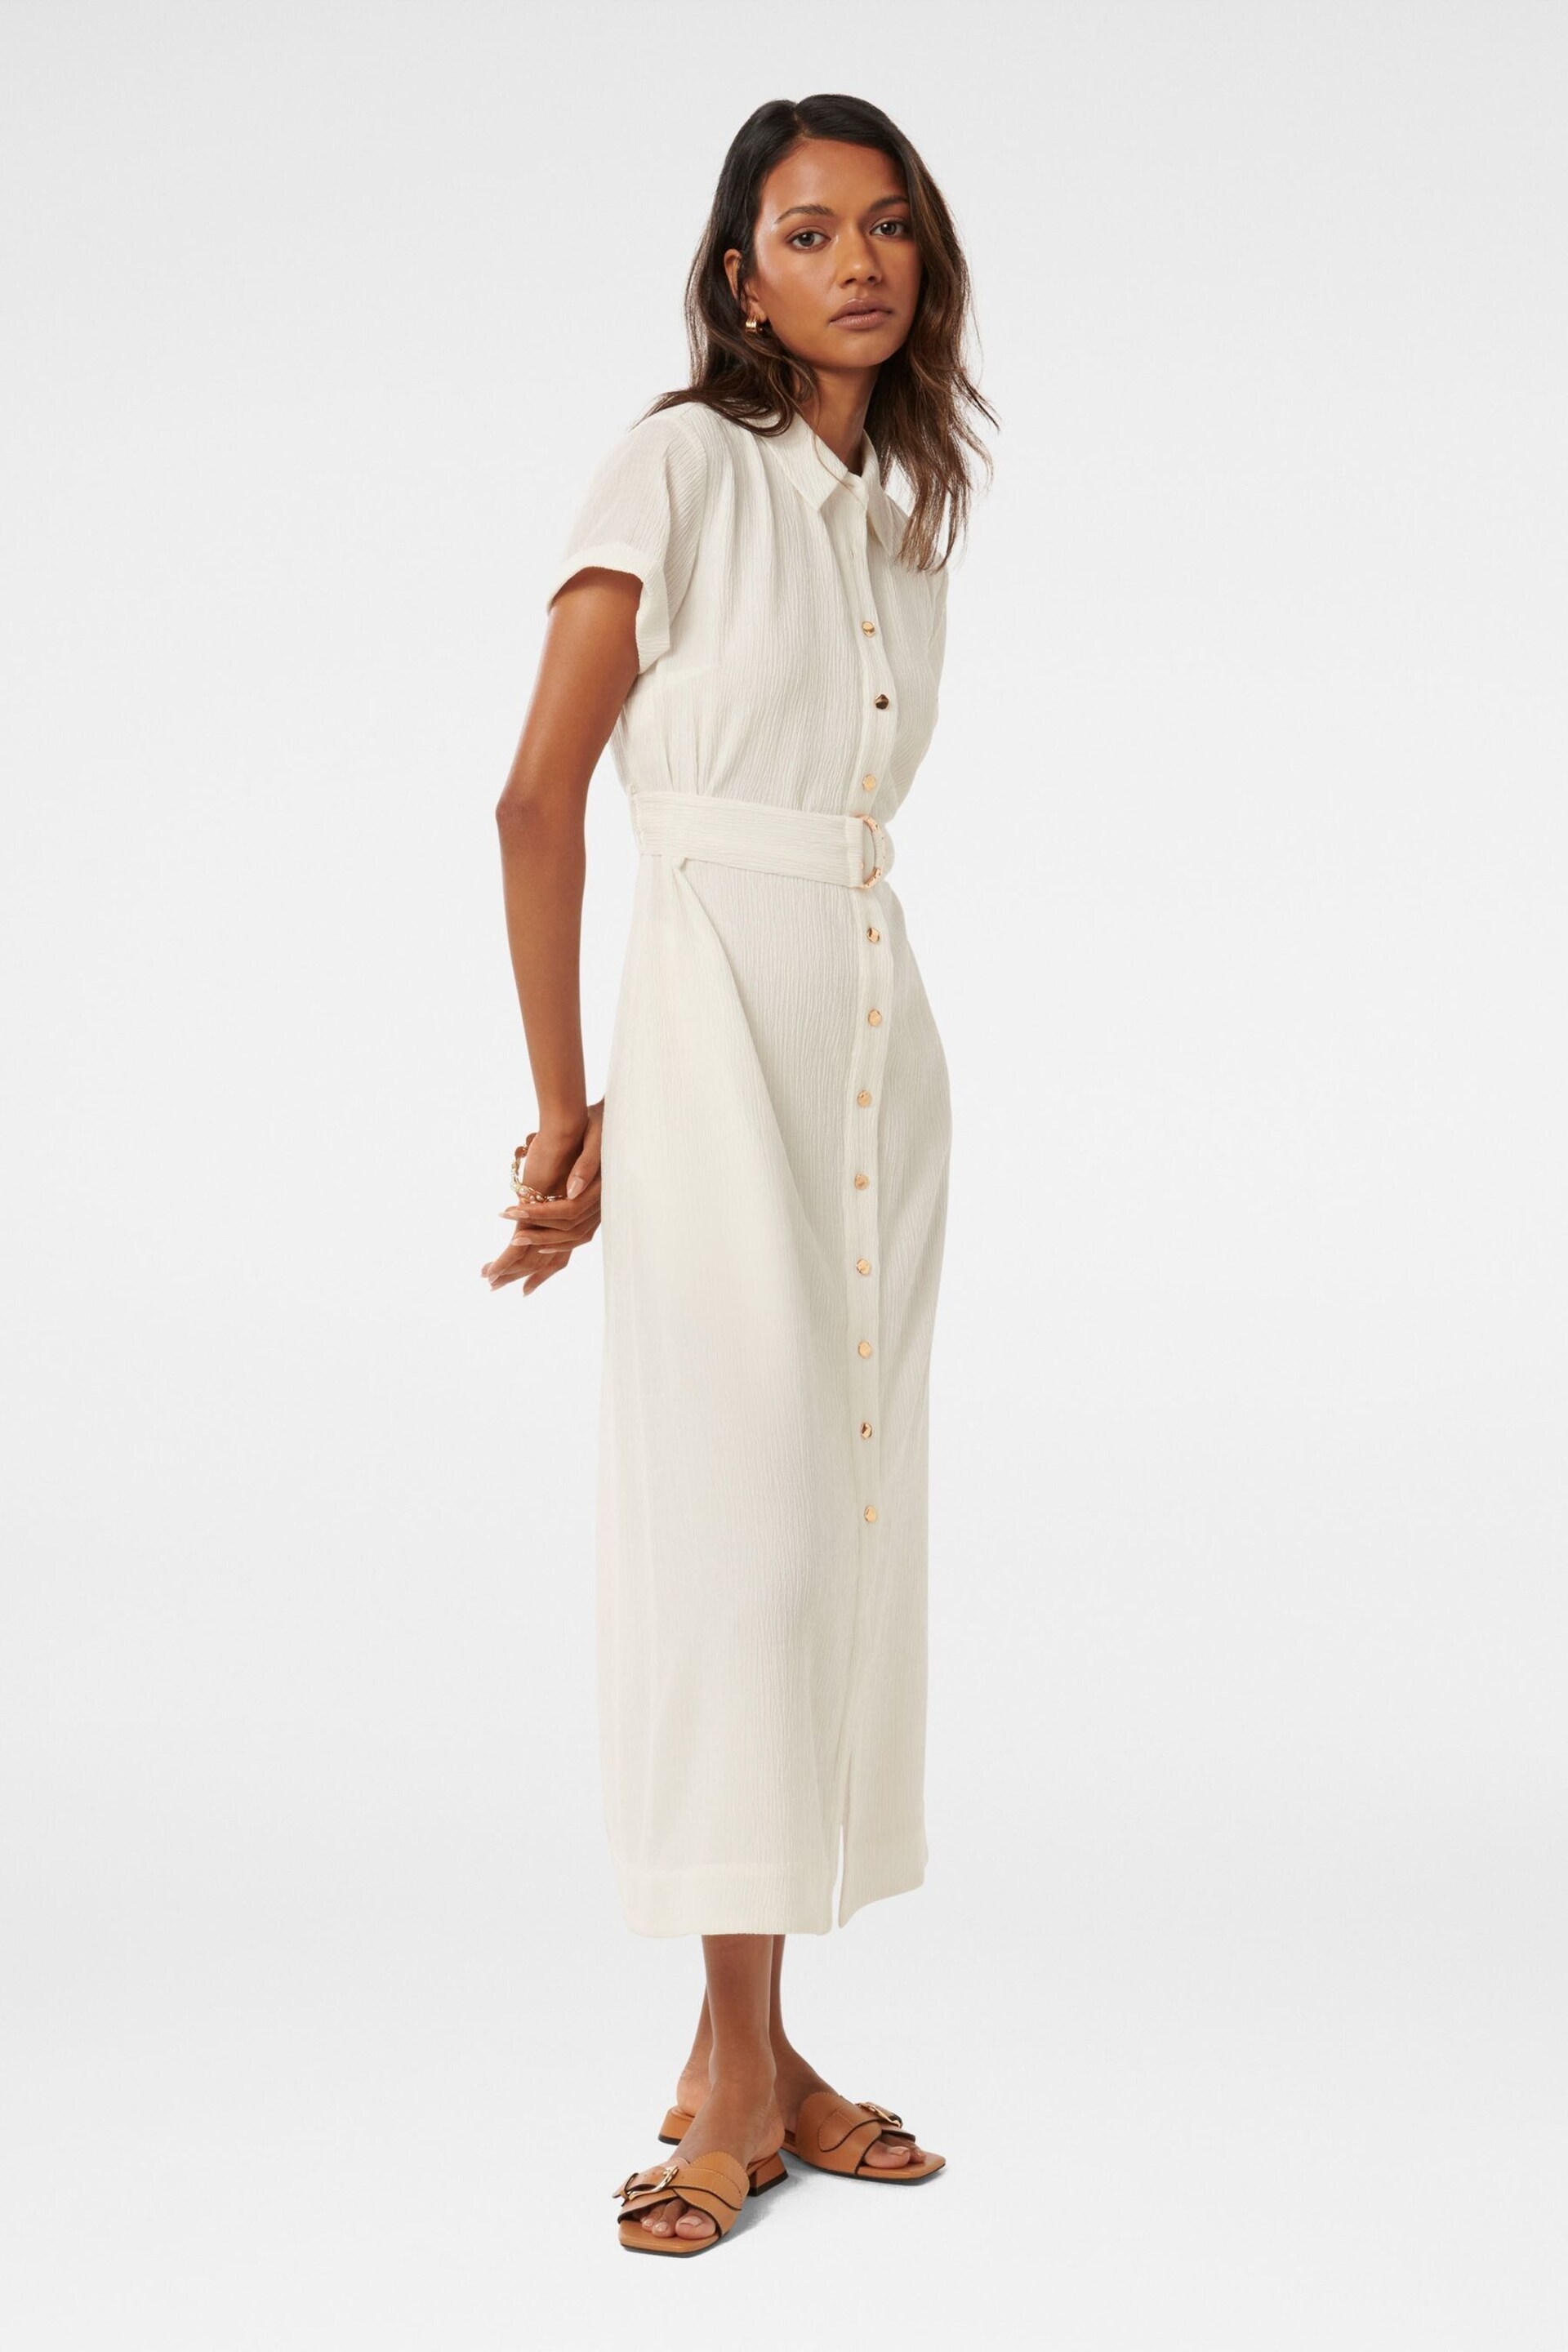 Forever New White Briley Petite Textured Shirt Dress - Image 3 of 4